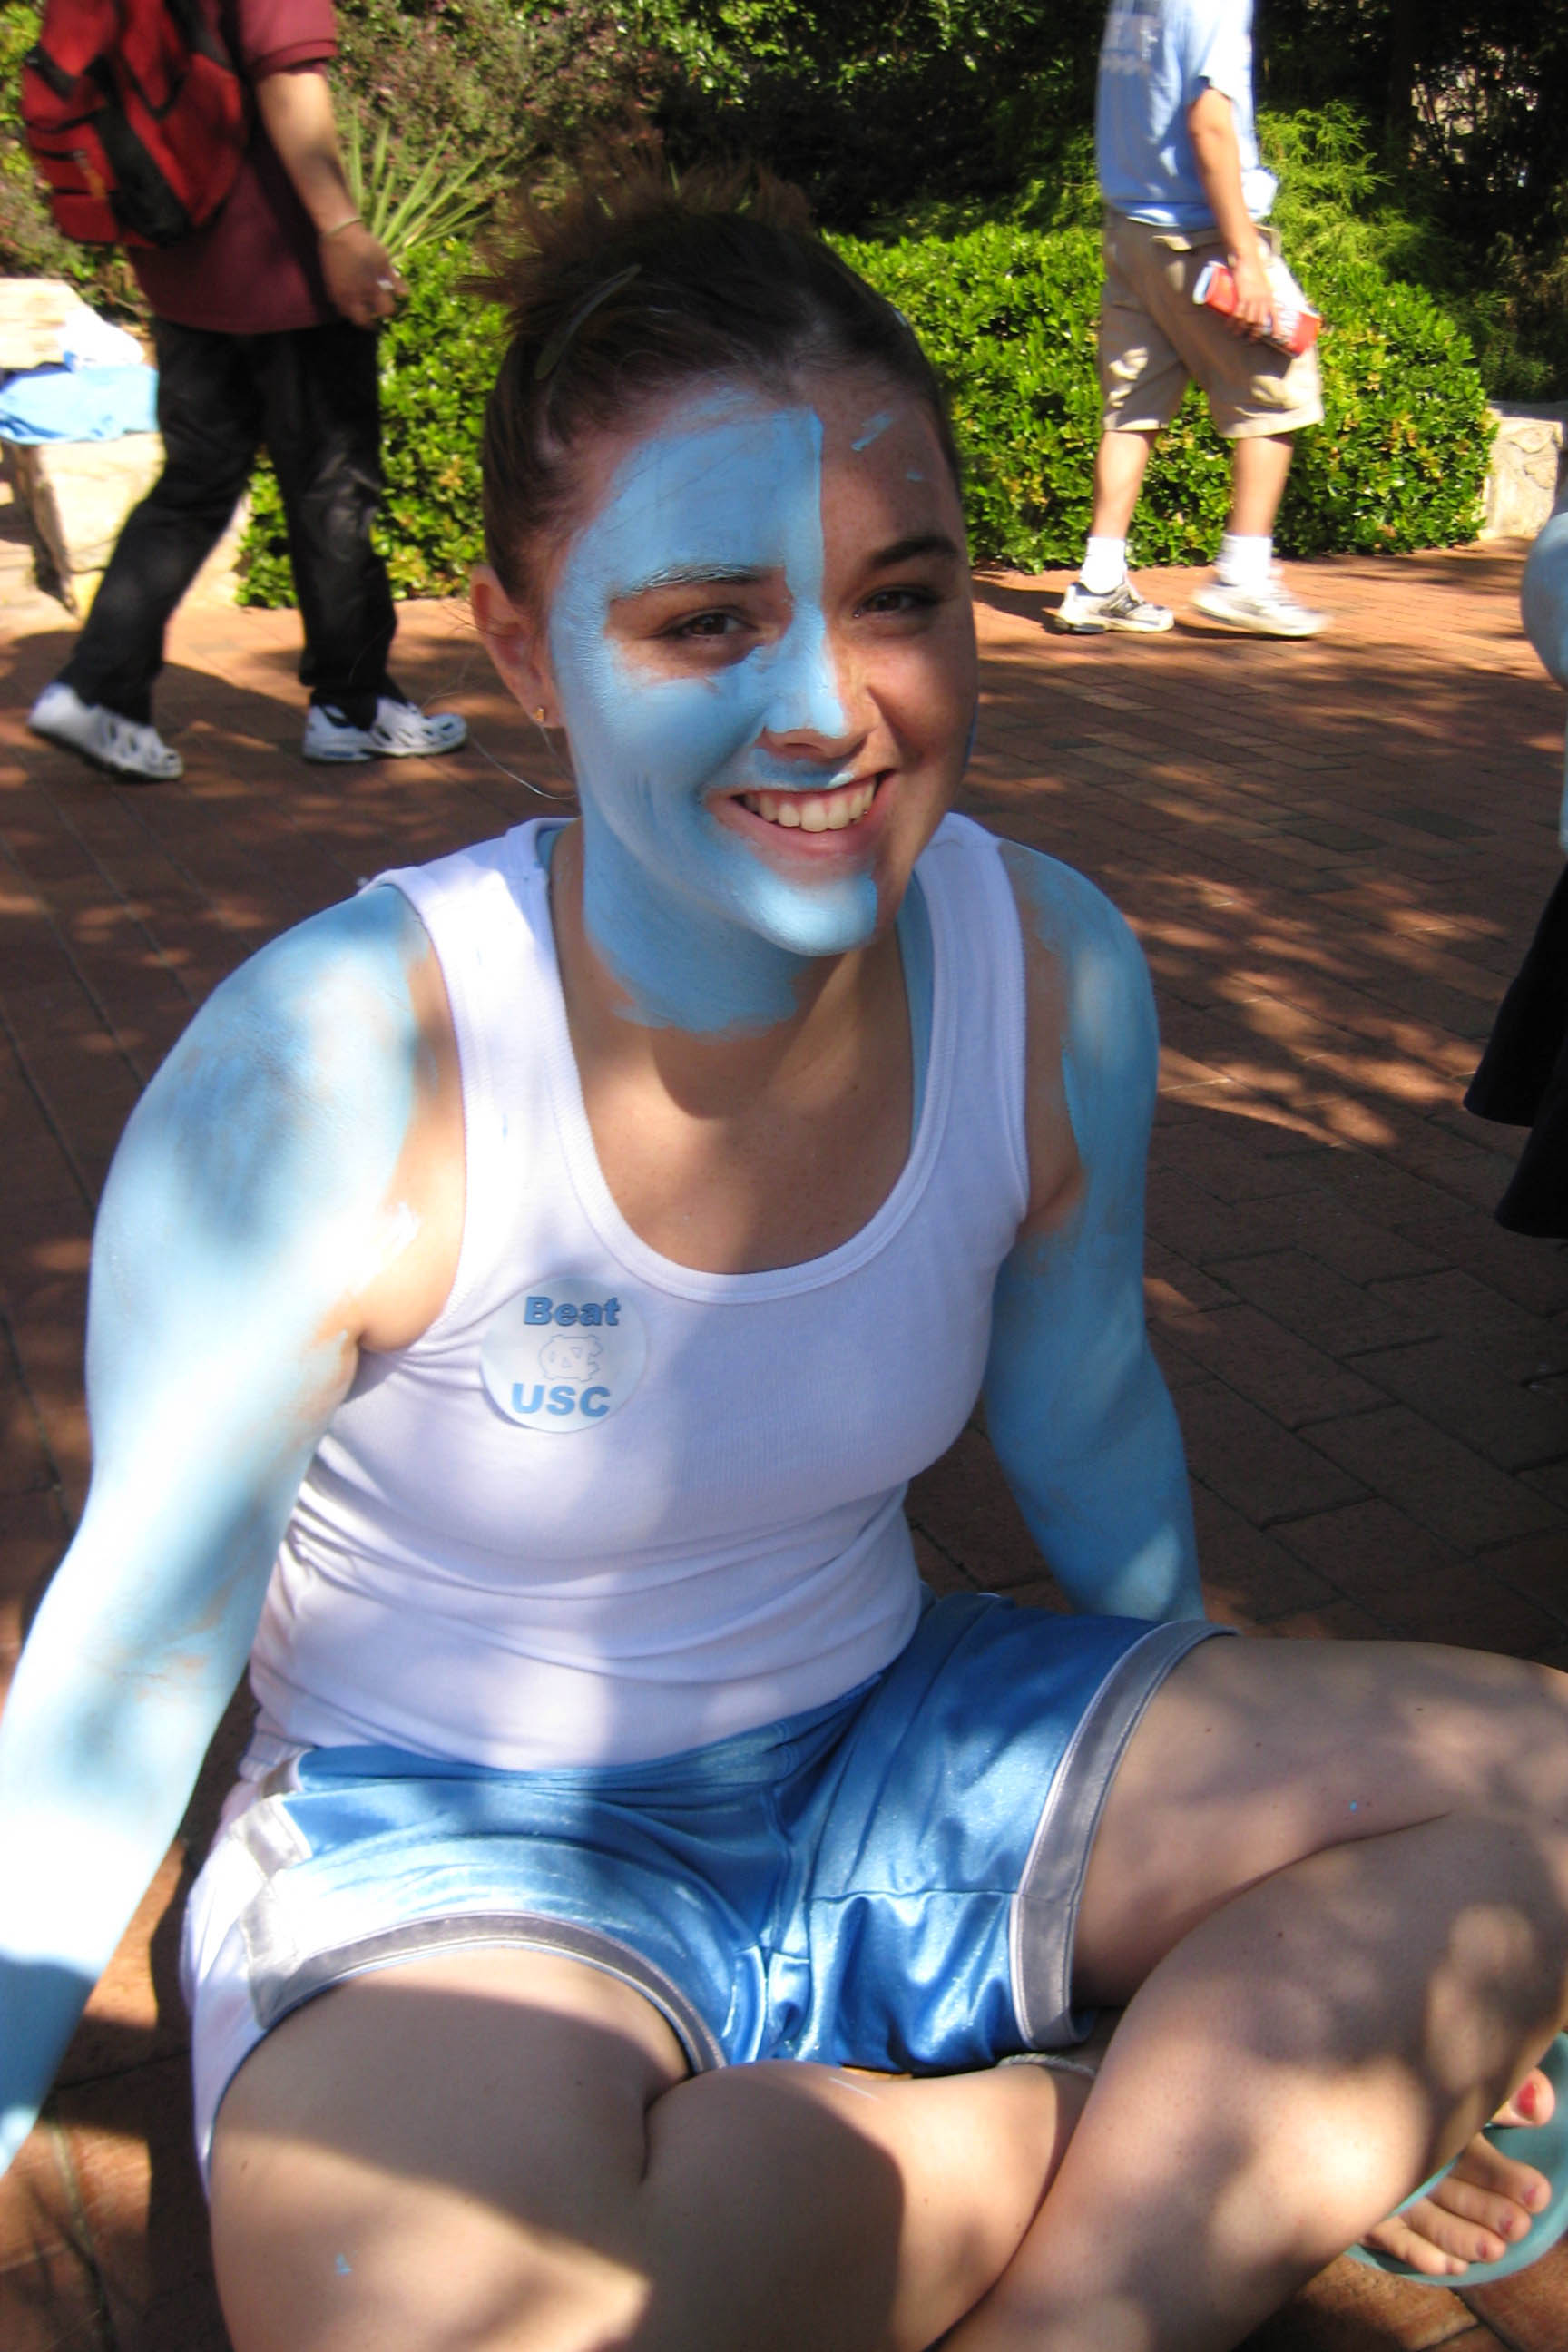 Painting up for a Carolina football game, as I did for nearly every game my freshman year. 